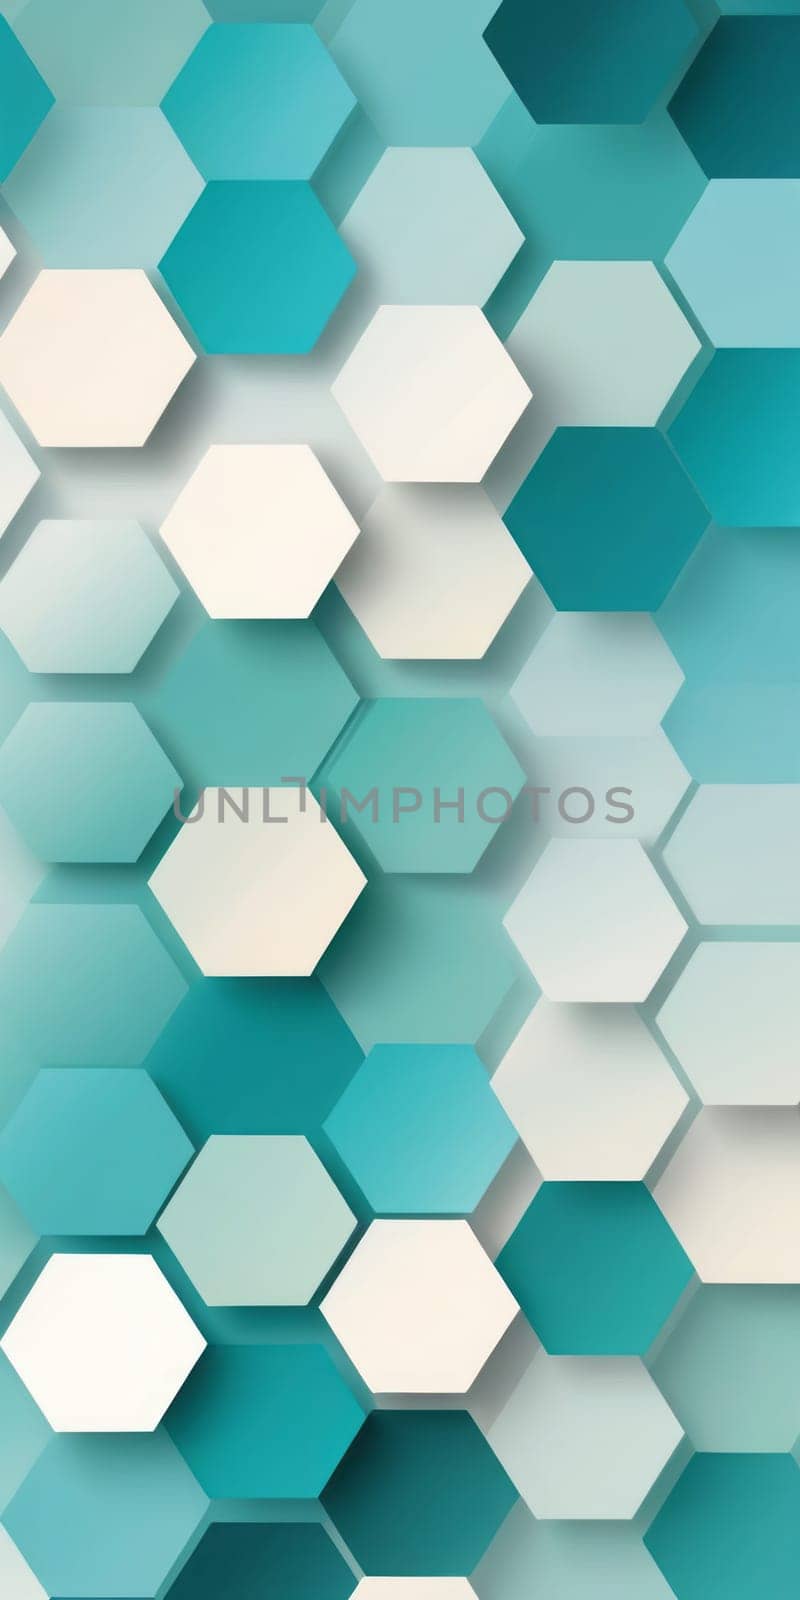 Hexagonal Shapes in White and Aquamarine by nkotlyar